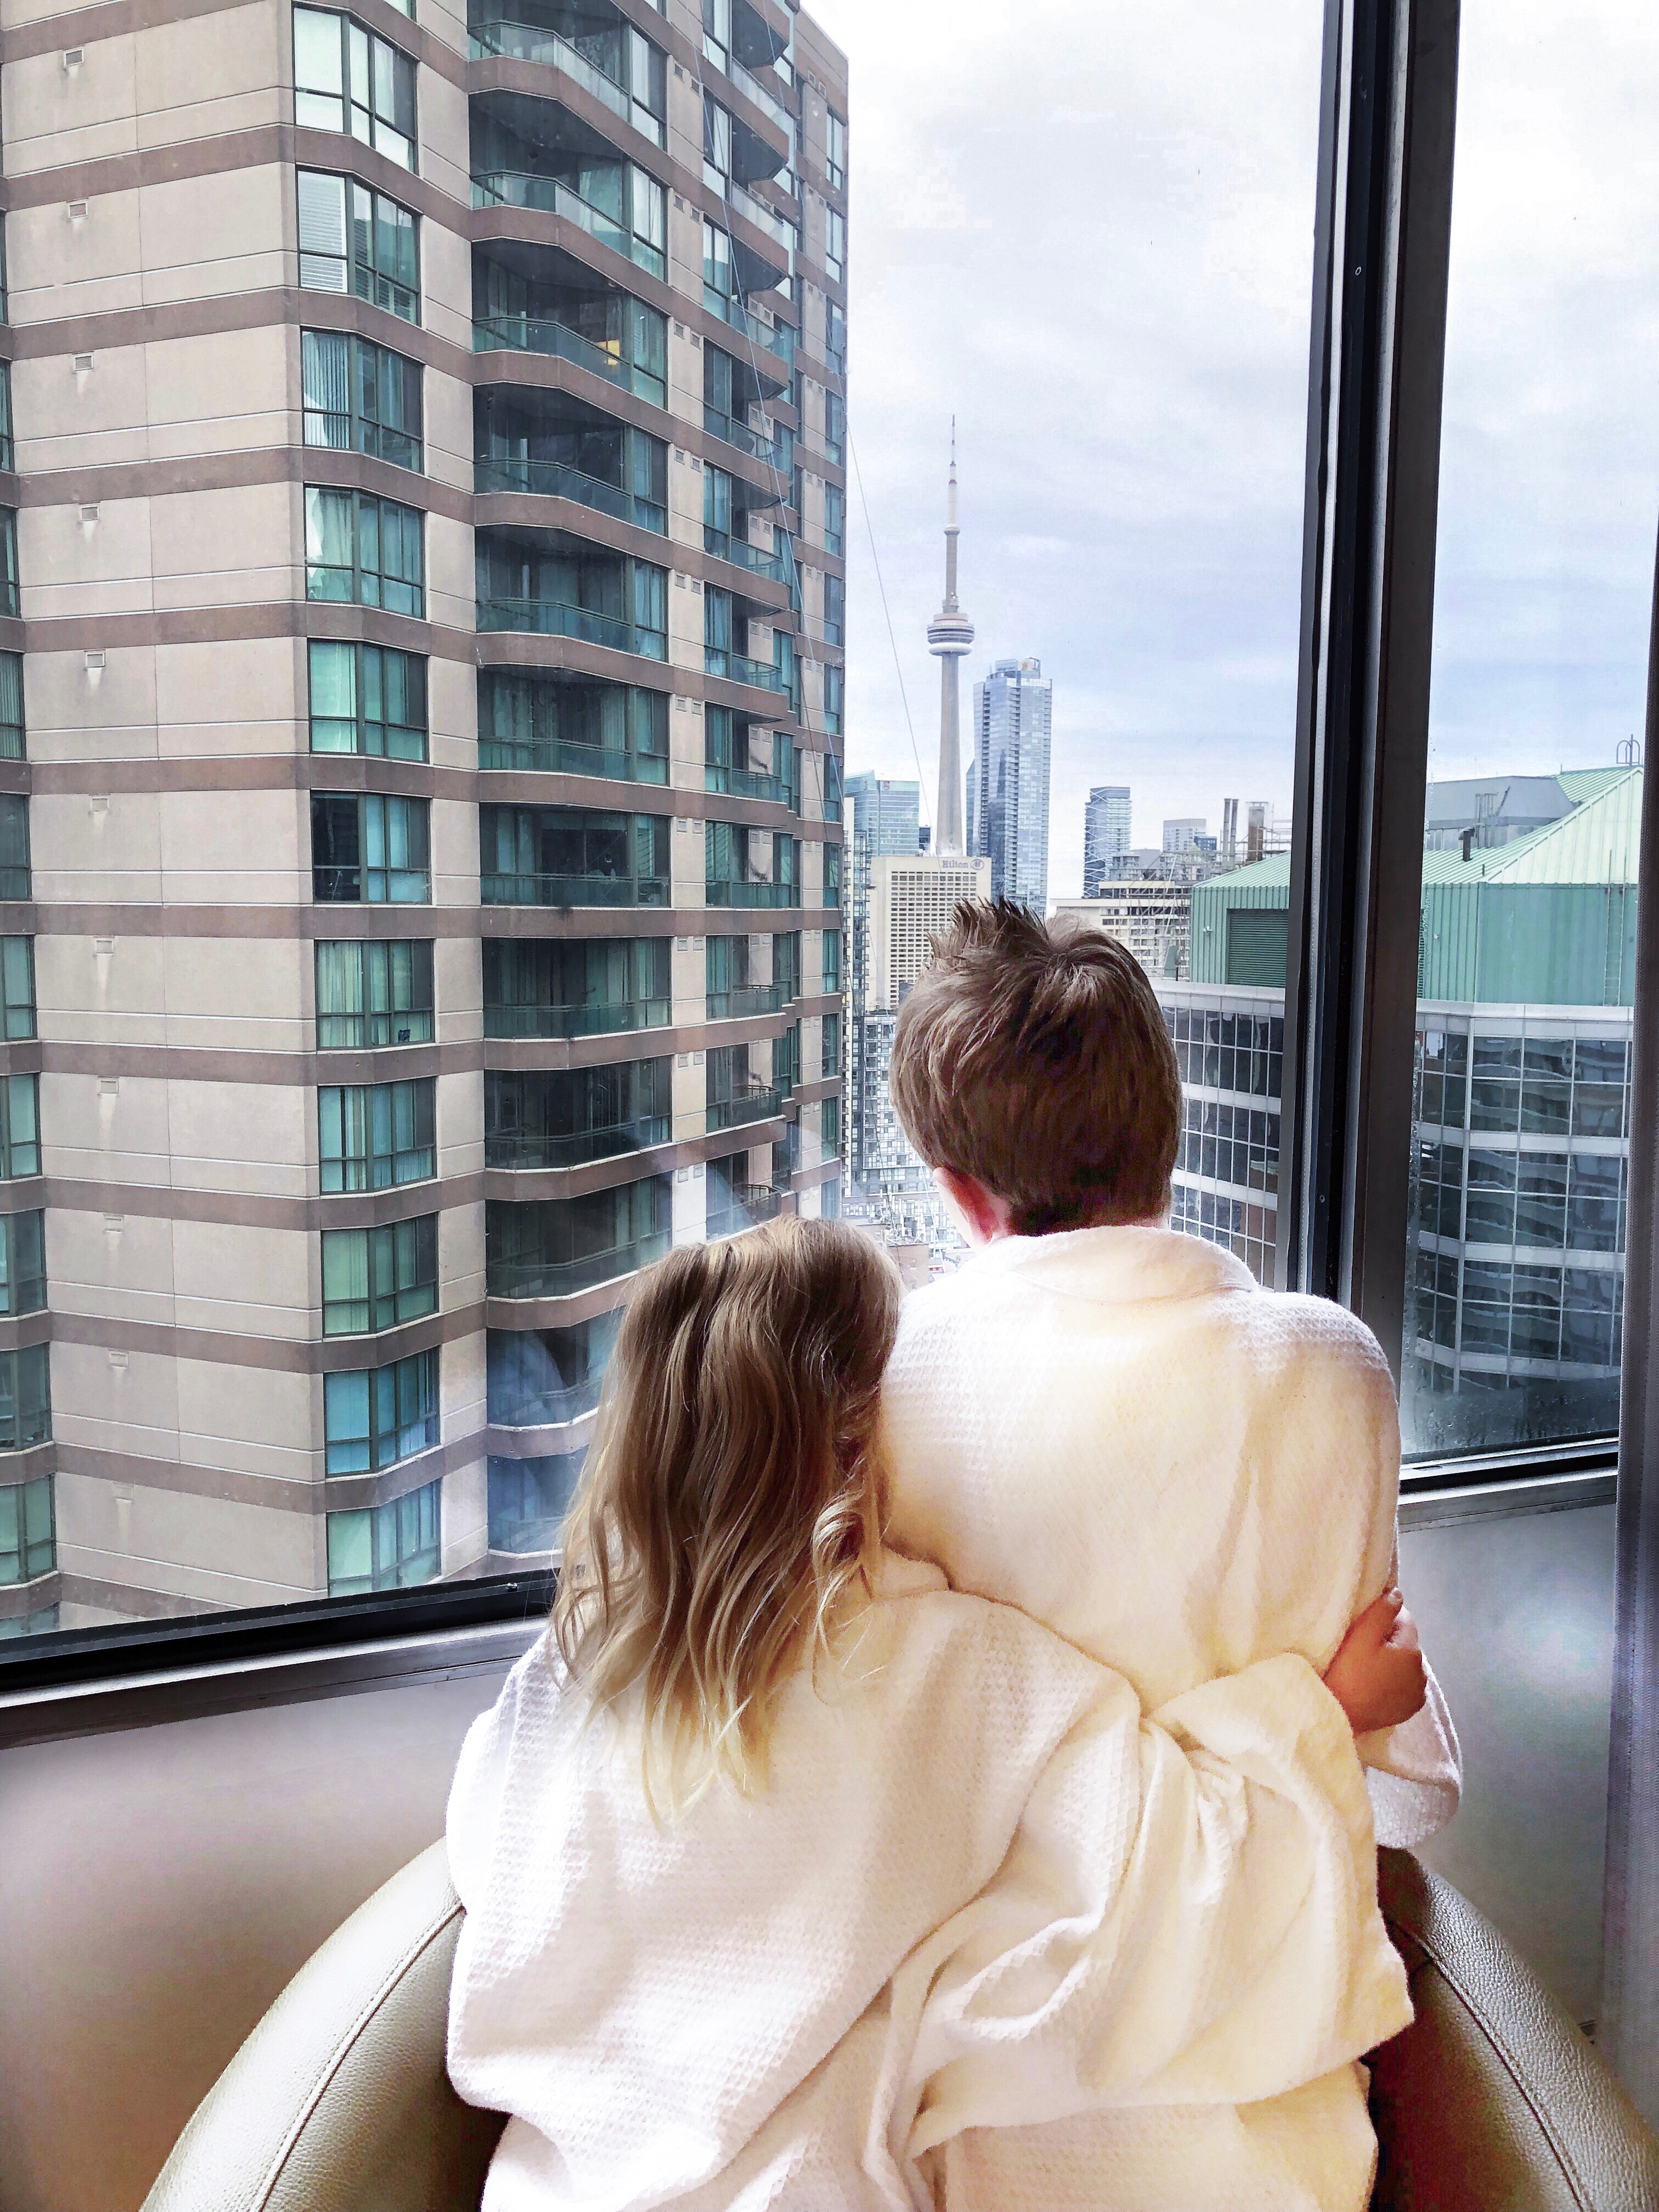 two bedroom Family Fun Suite Chelsea Hotel Toronto review on Livin life with style 